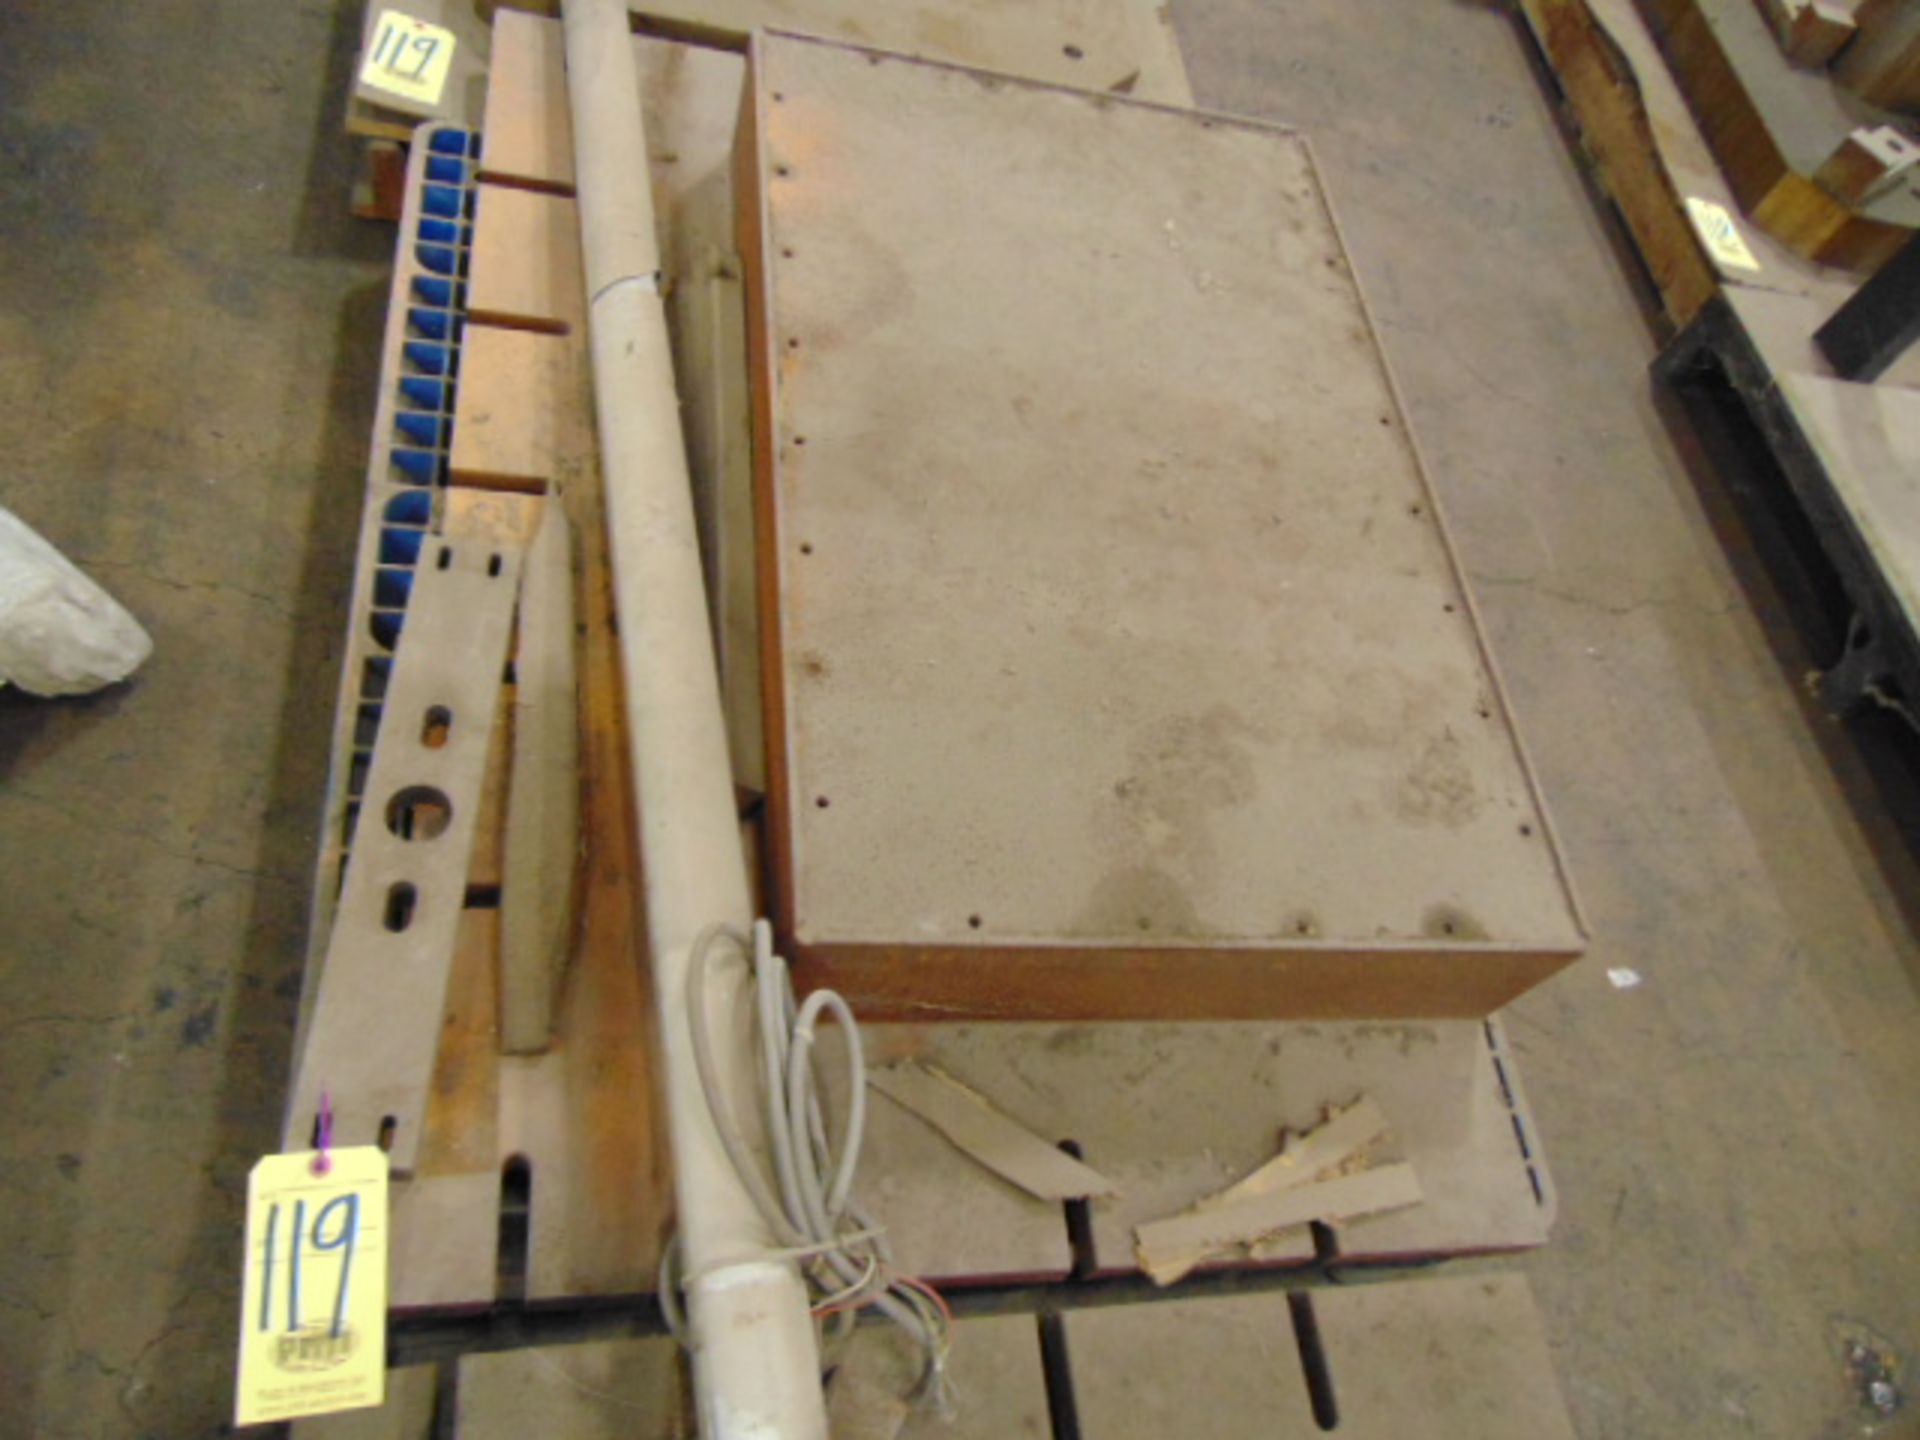 LOT CONSISTING OF: fixtures & chuck jaws, assorted (on six pallets) - Image 4 of 6